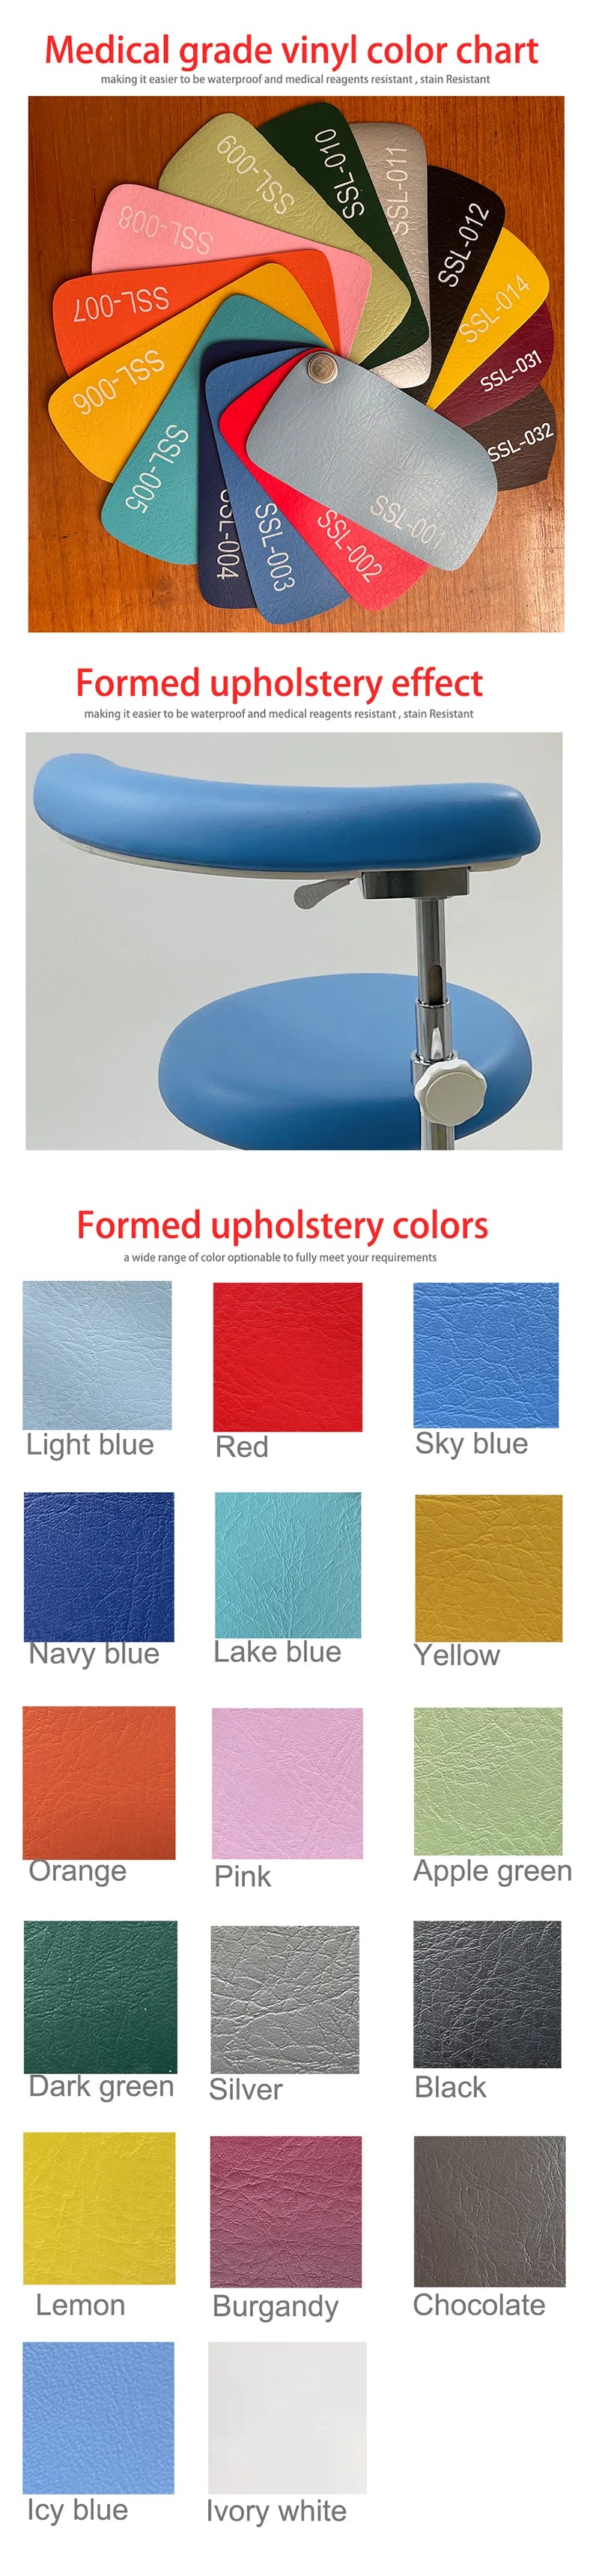 PU vinyl color swatch for dentist assistant stool